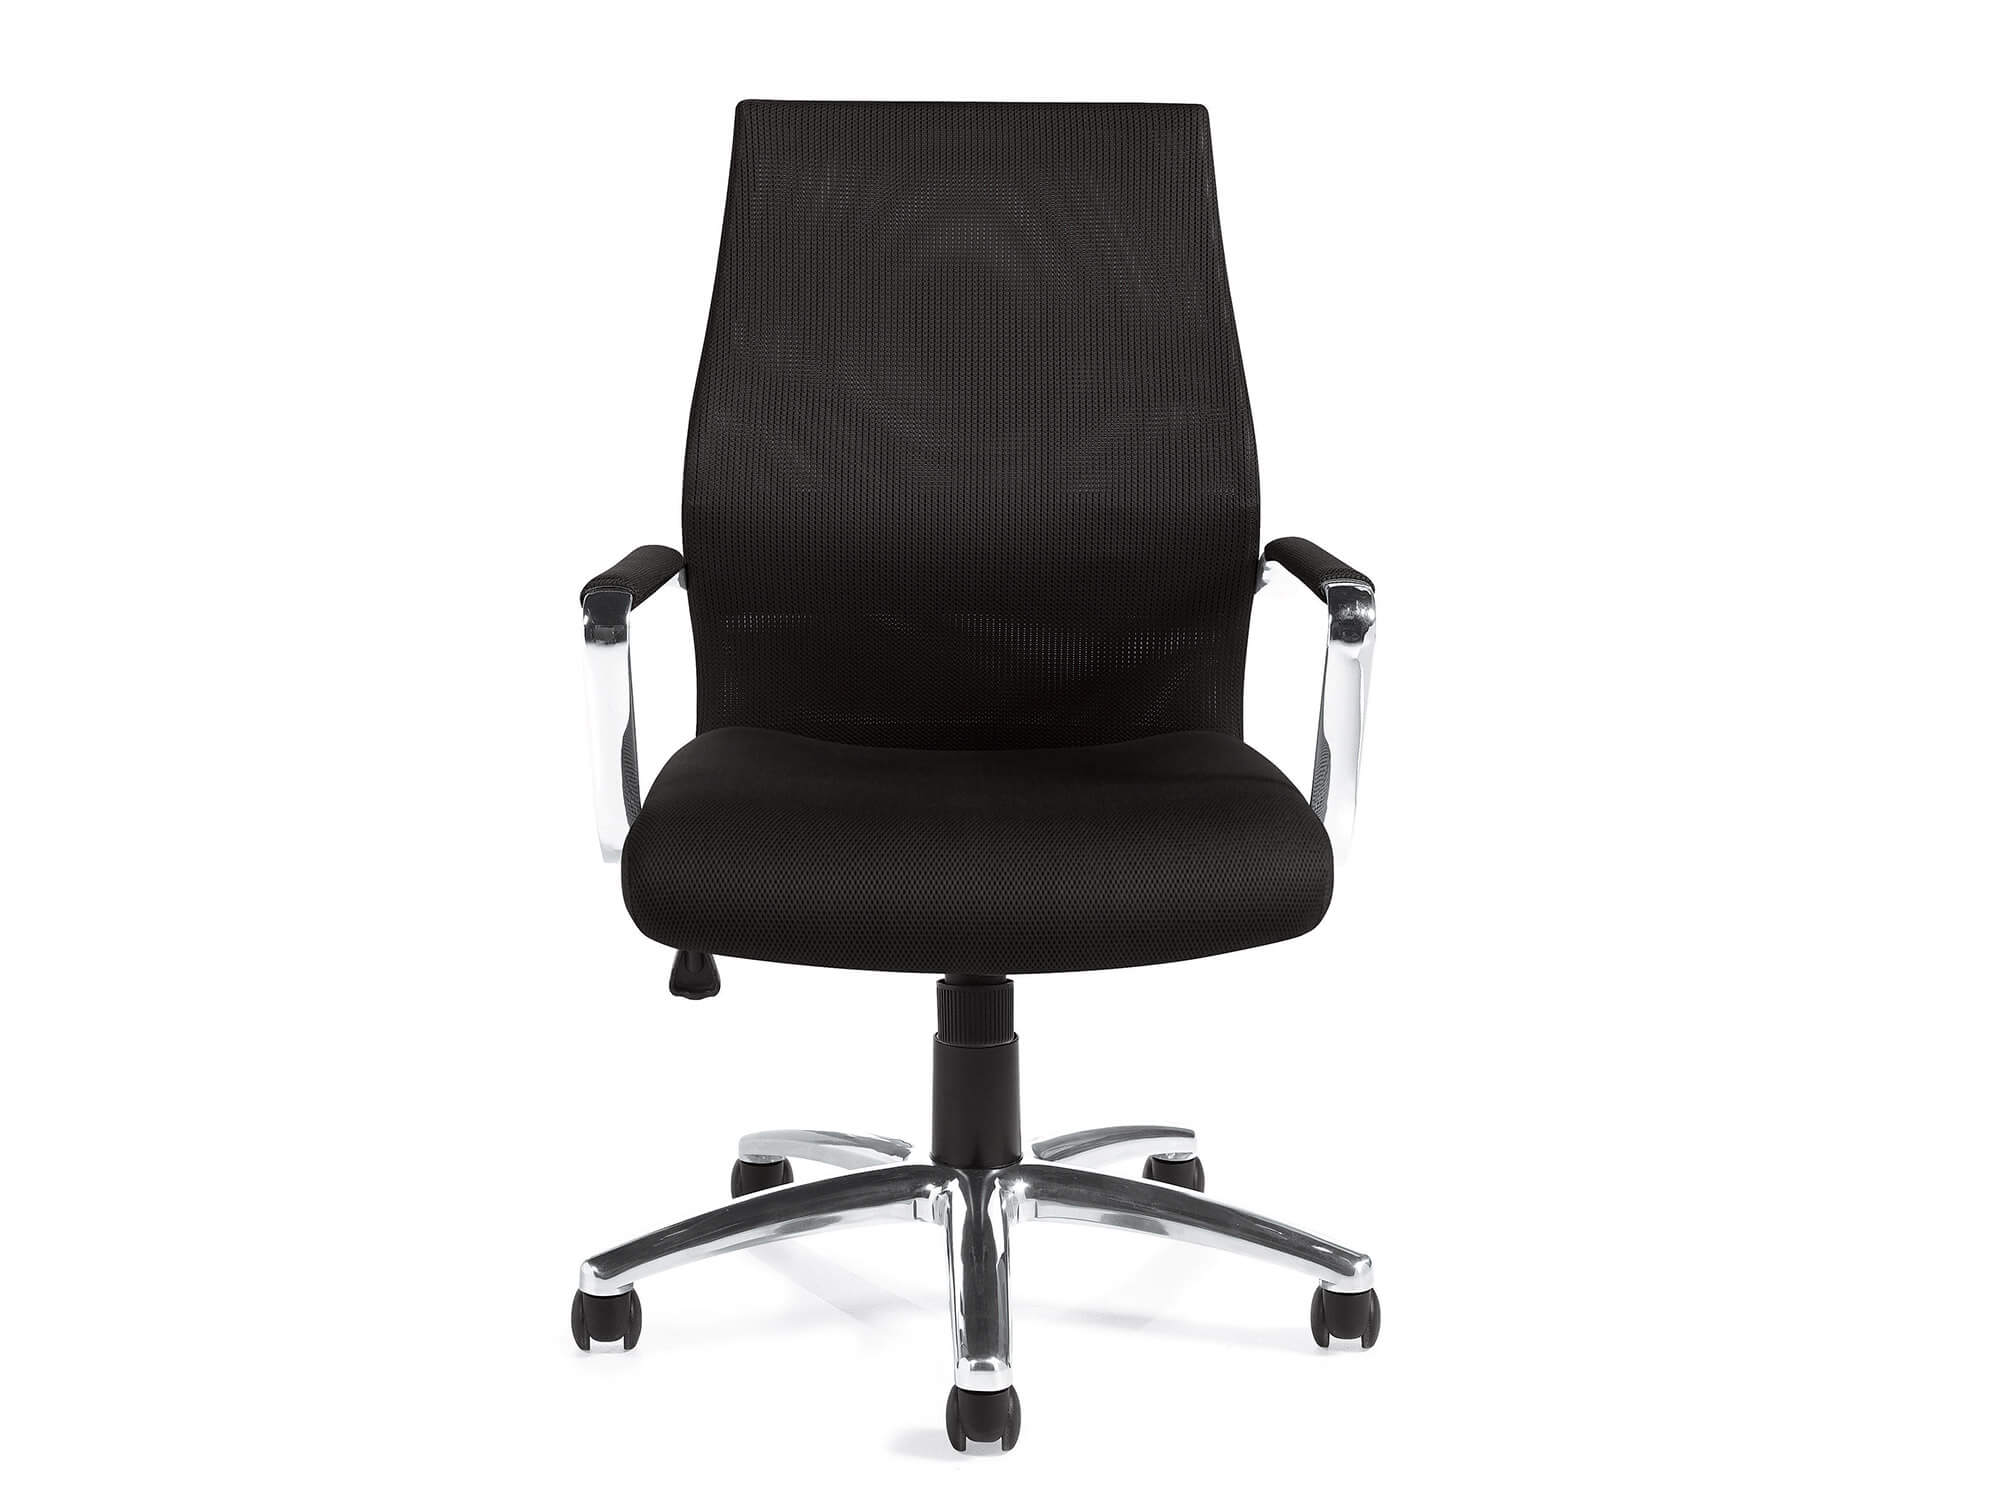 Modern office chair front